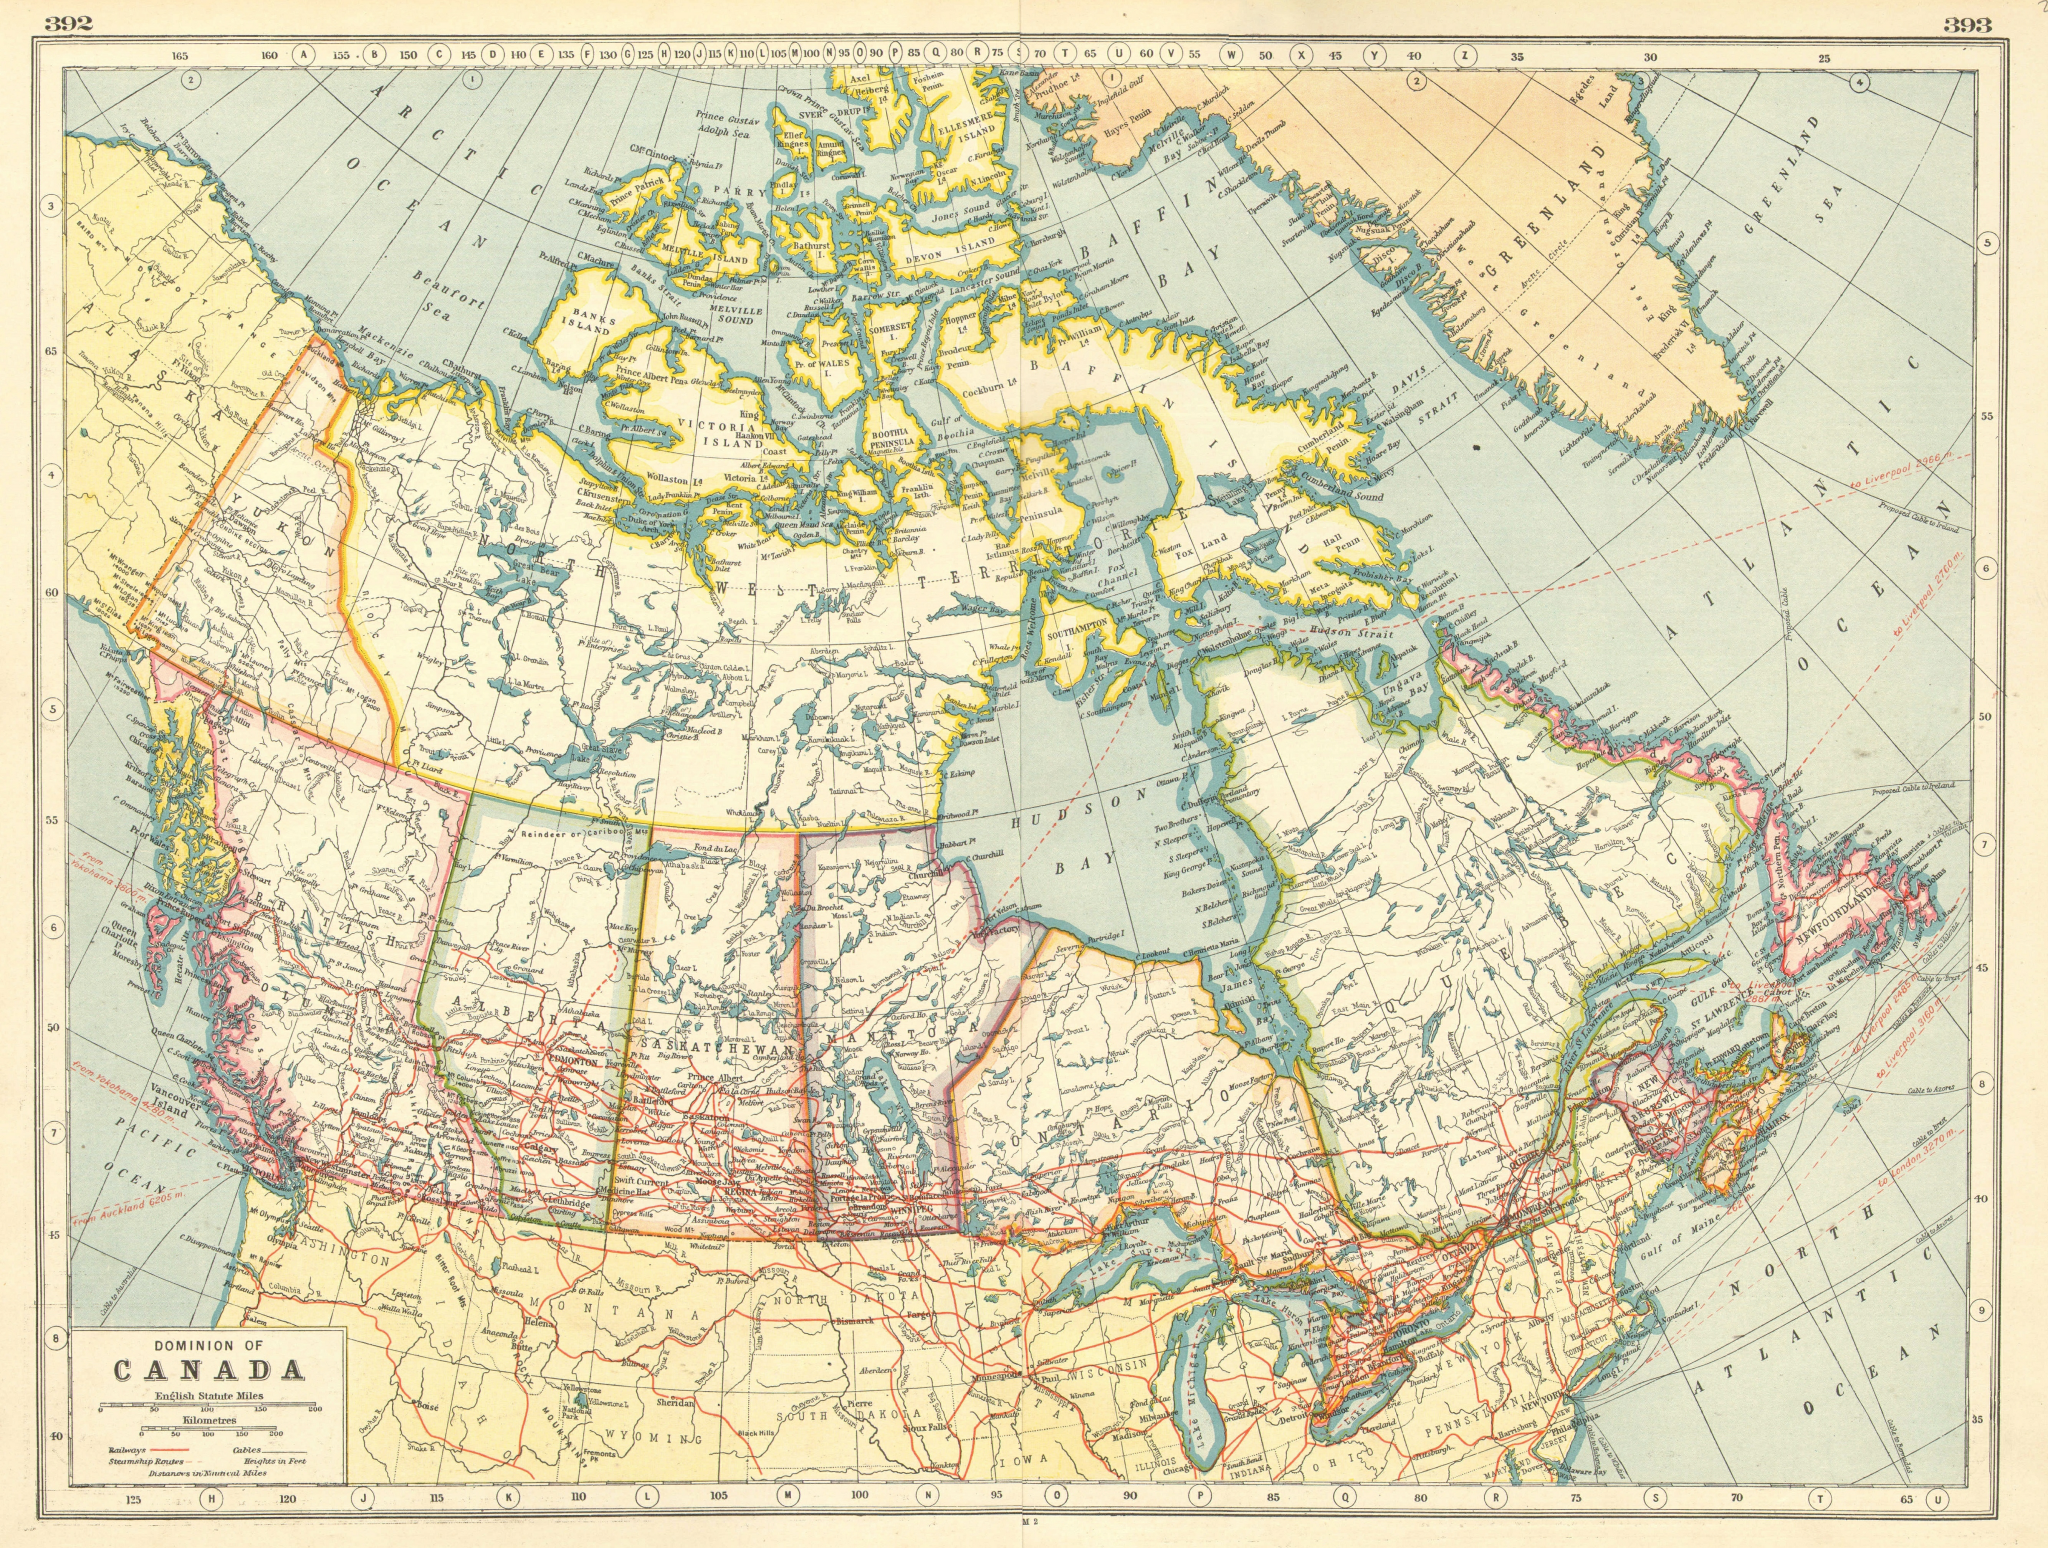 Associate Product CANADA. Dominion of Canada. HARMSWORTH 1920 old antique vintage map plan chart